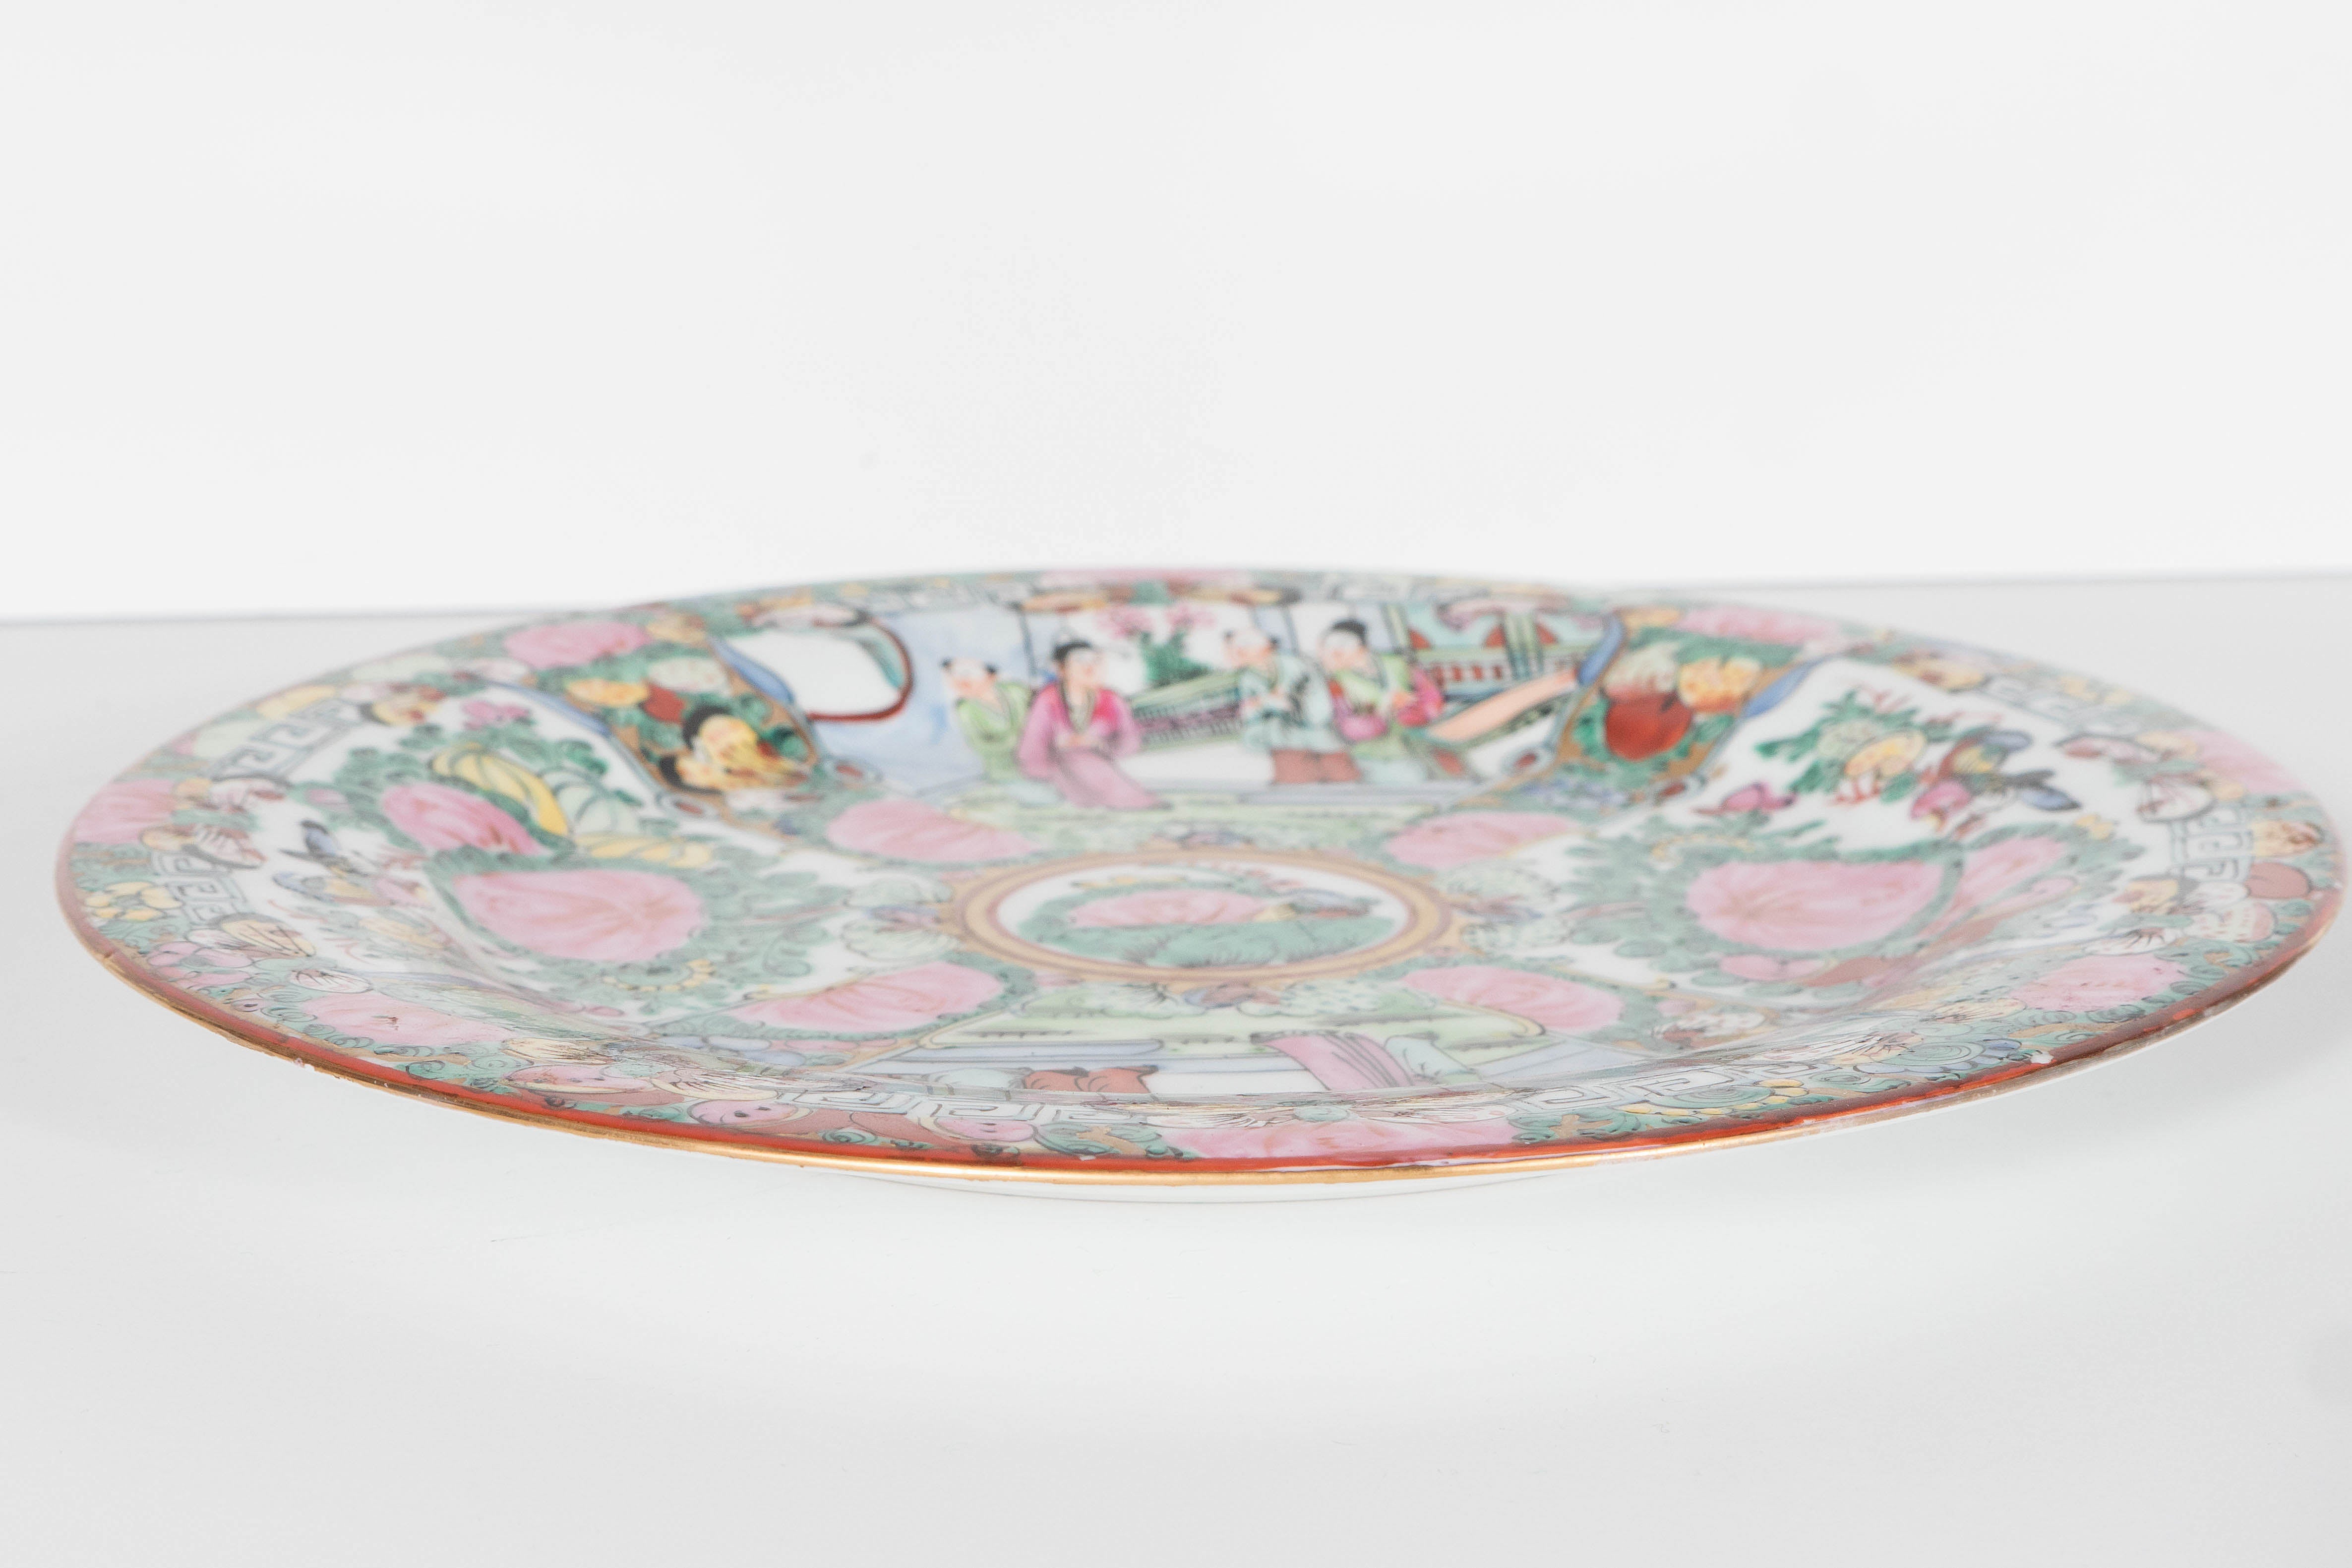 Mid-20th Century Chinese Rose Medallion Porcelain Plate with Floral and Everyday Life Decoration